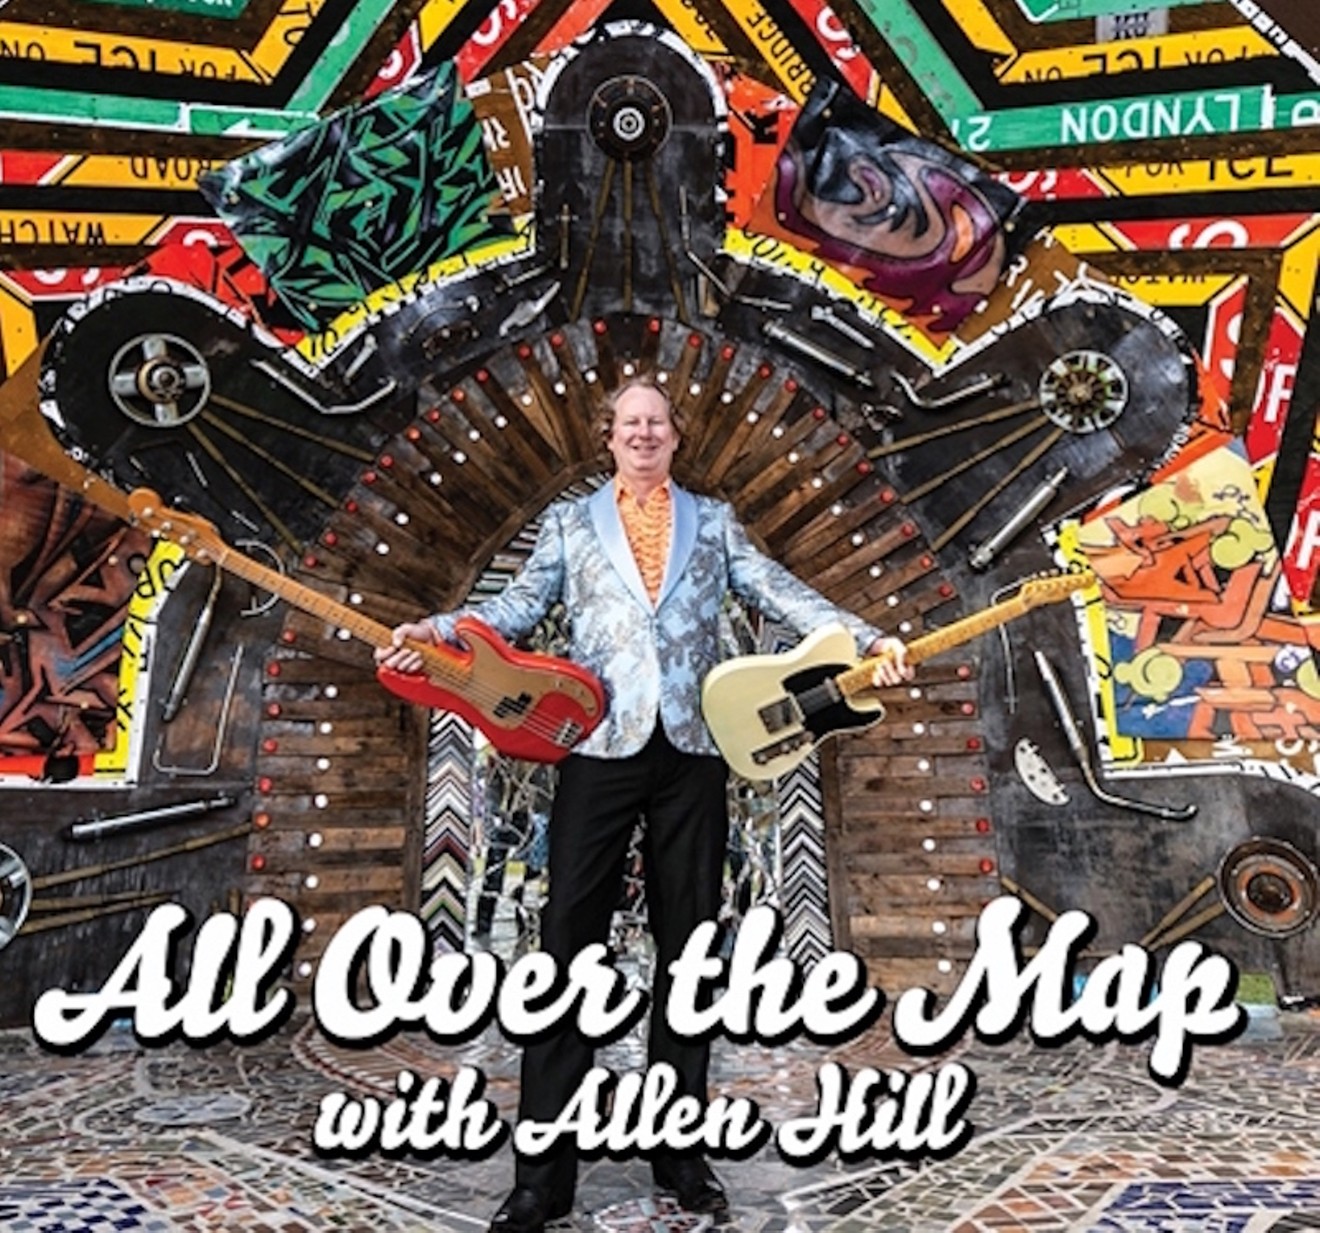 Allen Hill is releasing his solo debut album September 6 and celebrating with events around town in the month of September.